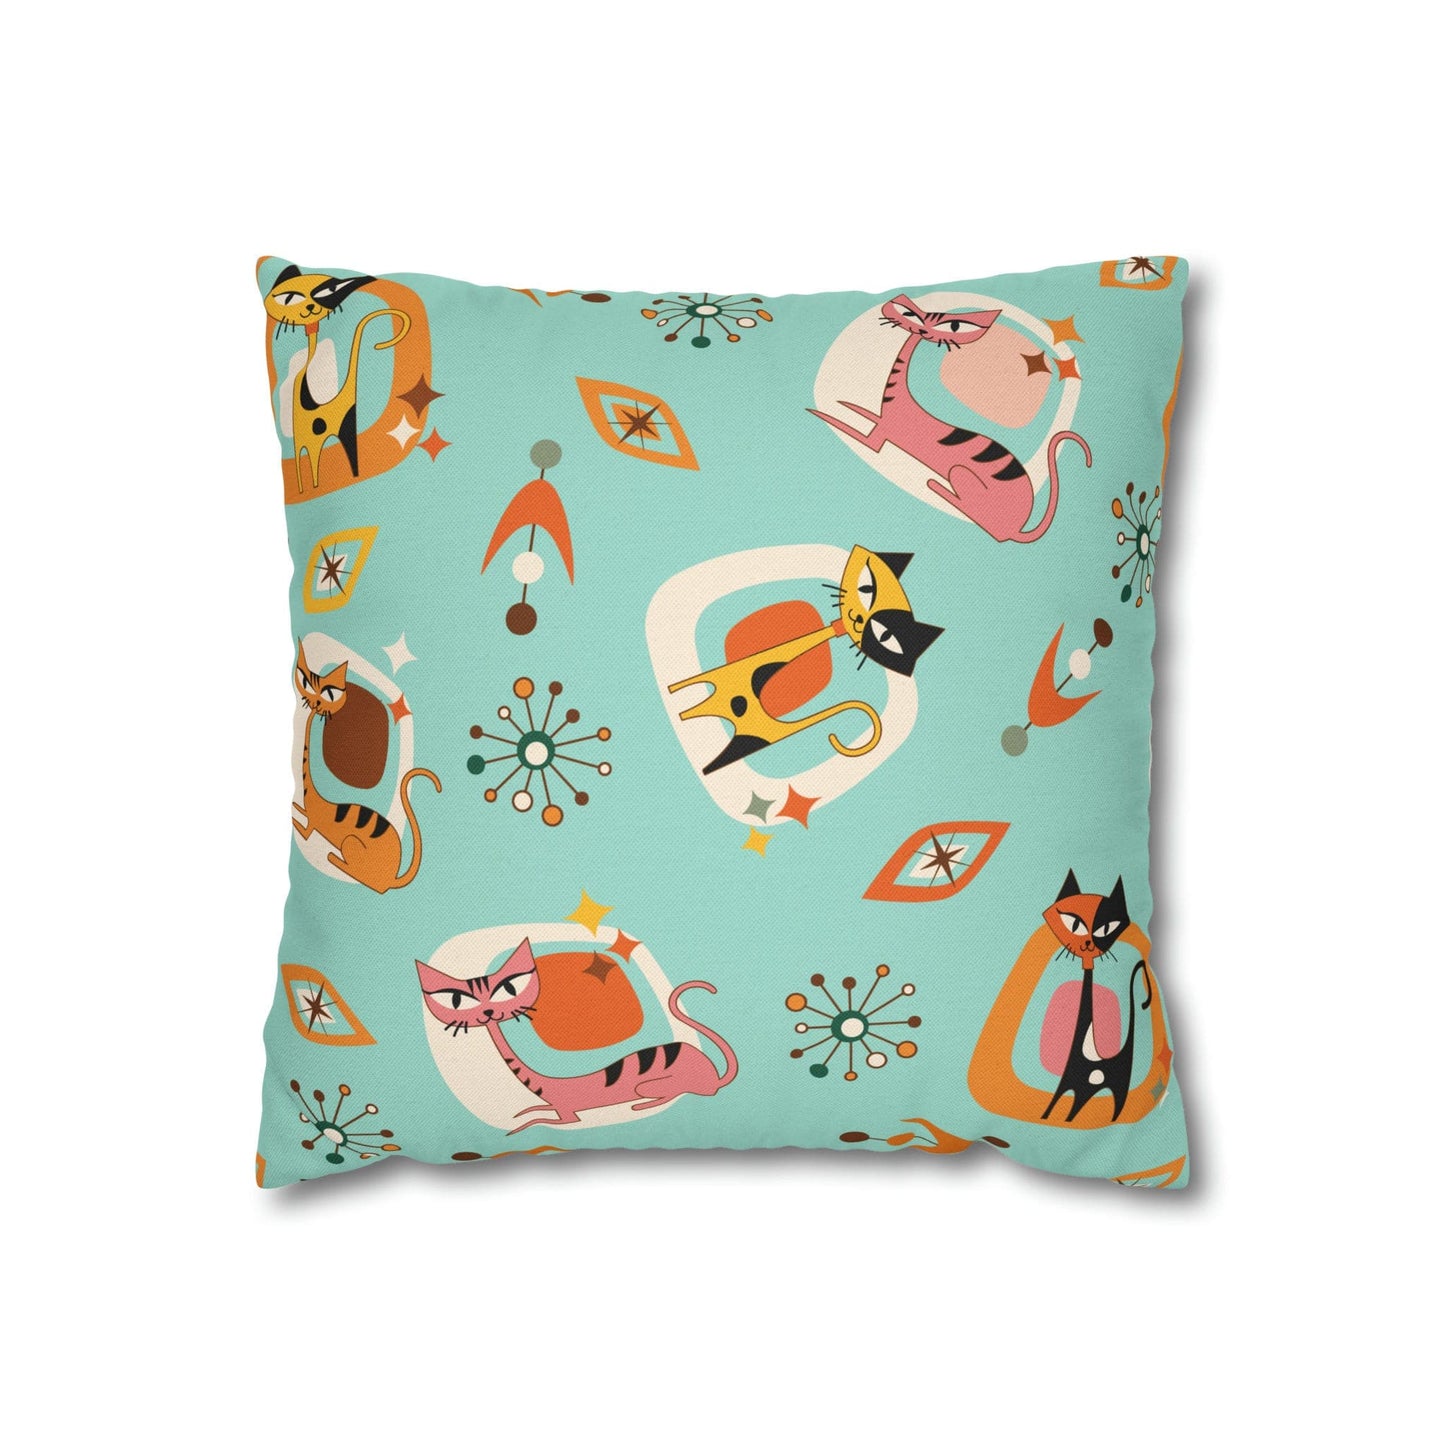 Kate McEnroe New York Atomic Cat 50s Mid Mod Pillow Cover, Retro Vintage Mid Century Modern Cushion Covers, Sputnik Kitschy Living Room, Bedroom Decor Throw Pillow Covers